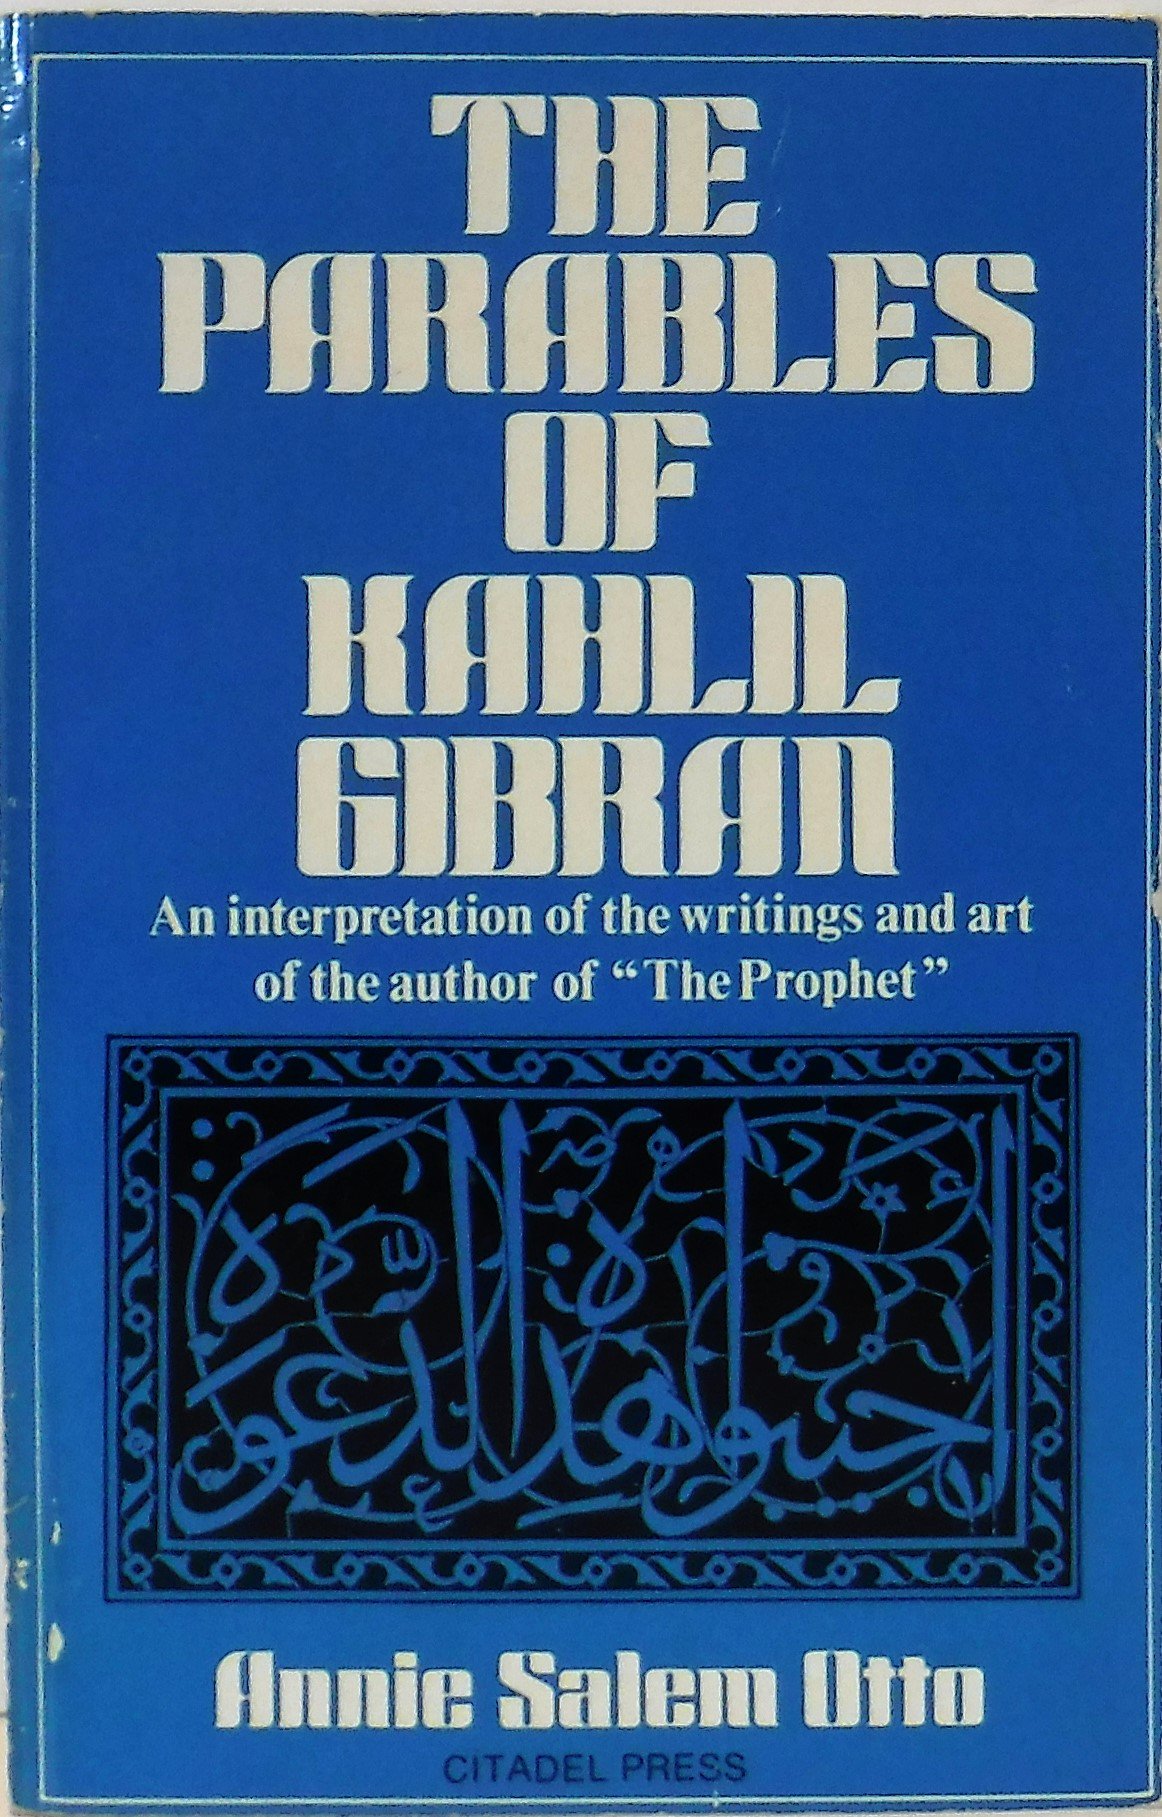 Annie Salem Otto, The Parables of Kahlil Gibran: An Interpretation of His Writings and His Art, Secaucus, New Jersey: Citadel Press, 1981.